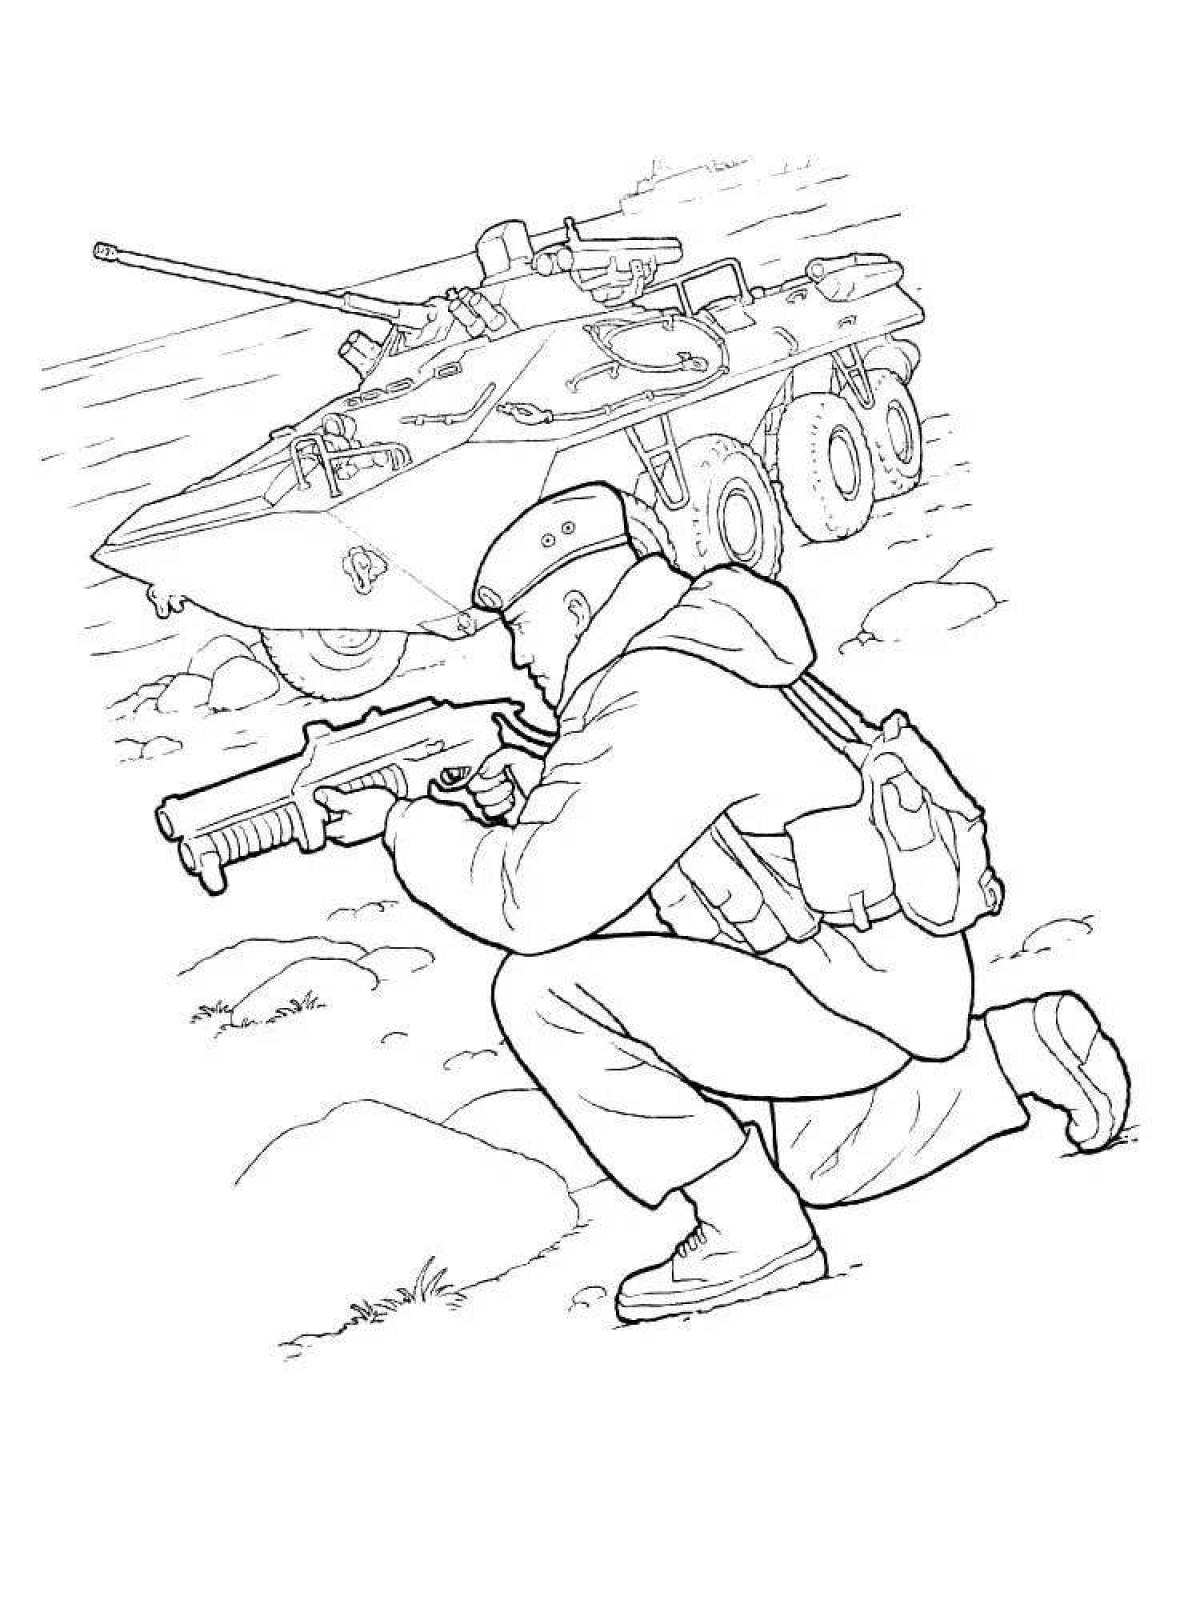 Coloring majestic Russian soldier